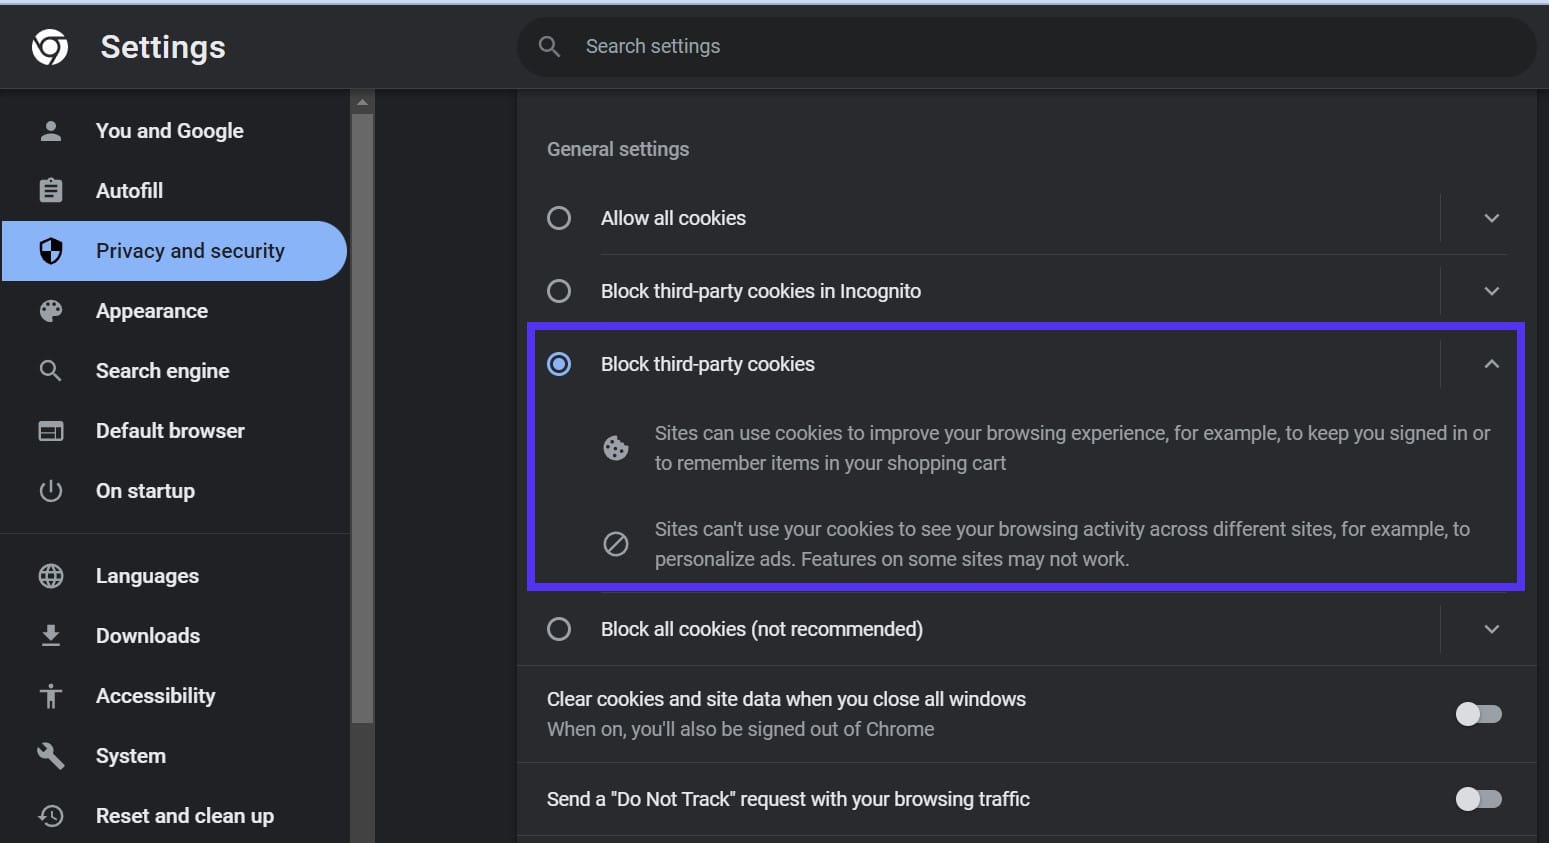 How to block third-party cookies in Google Chrome